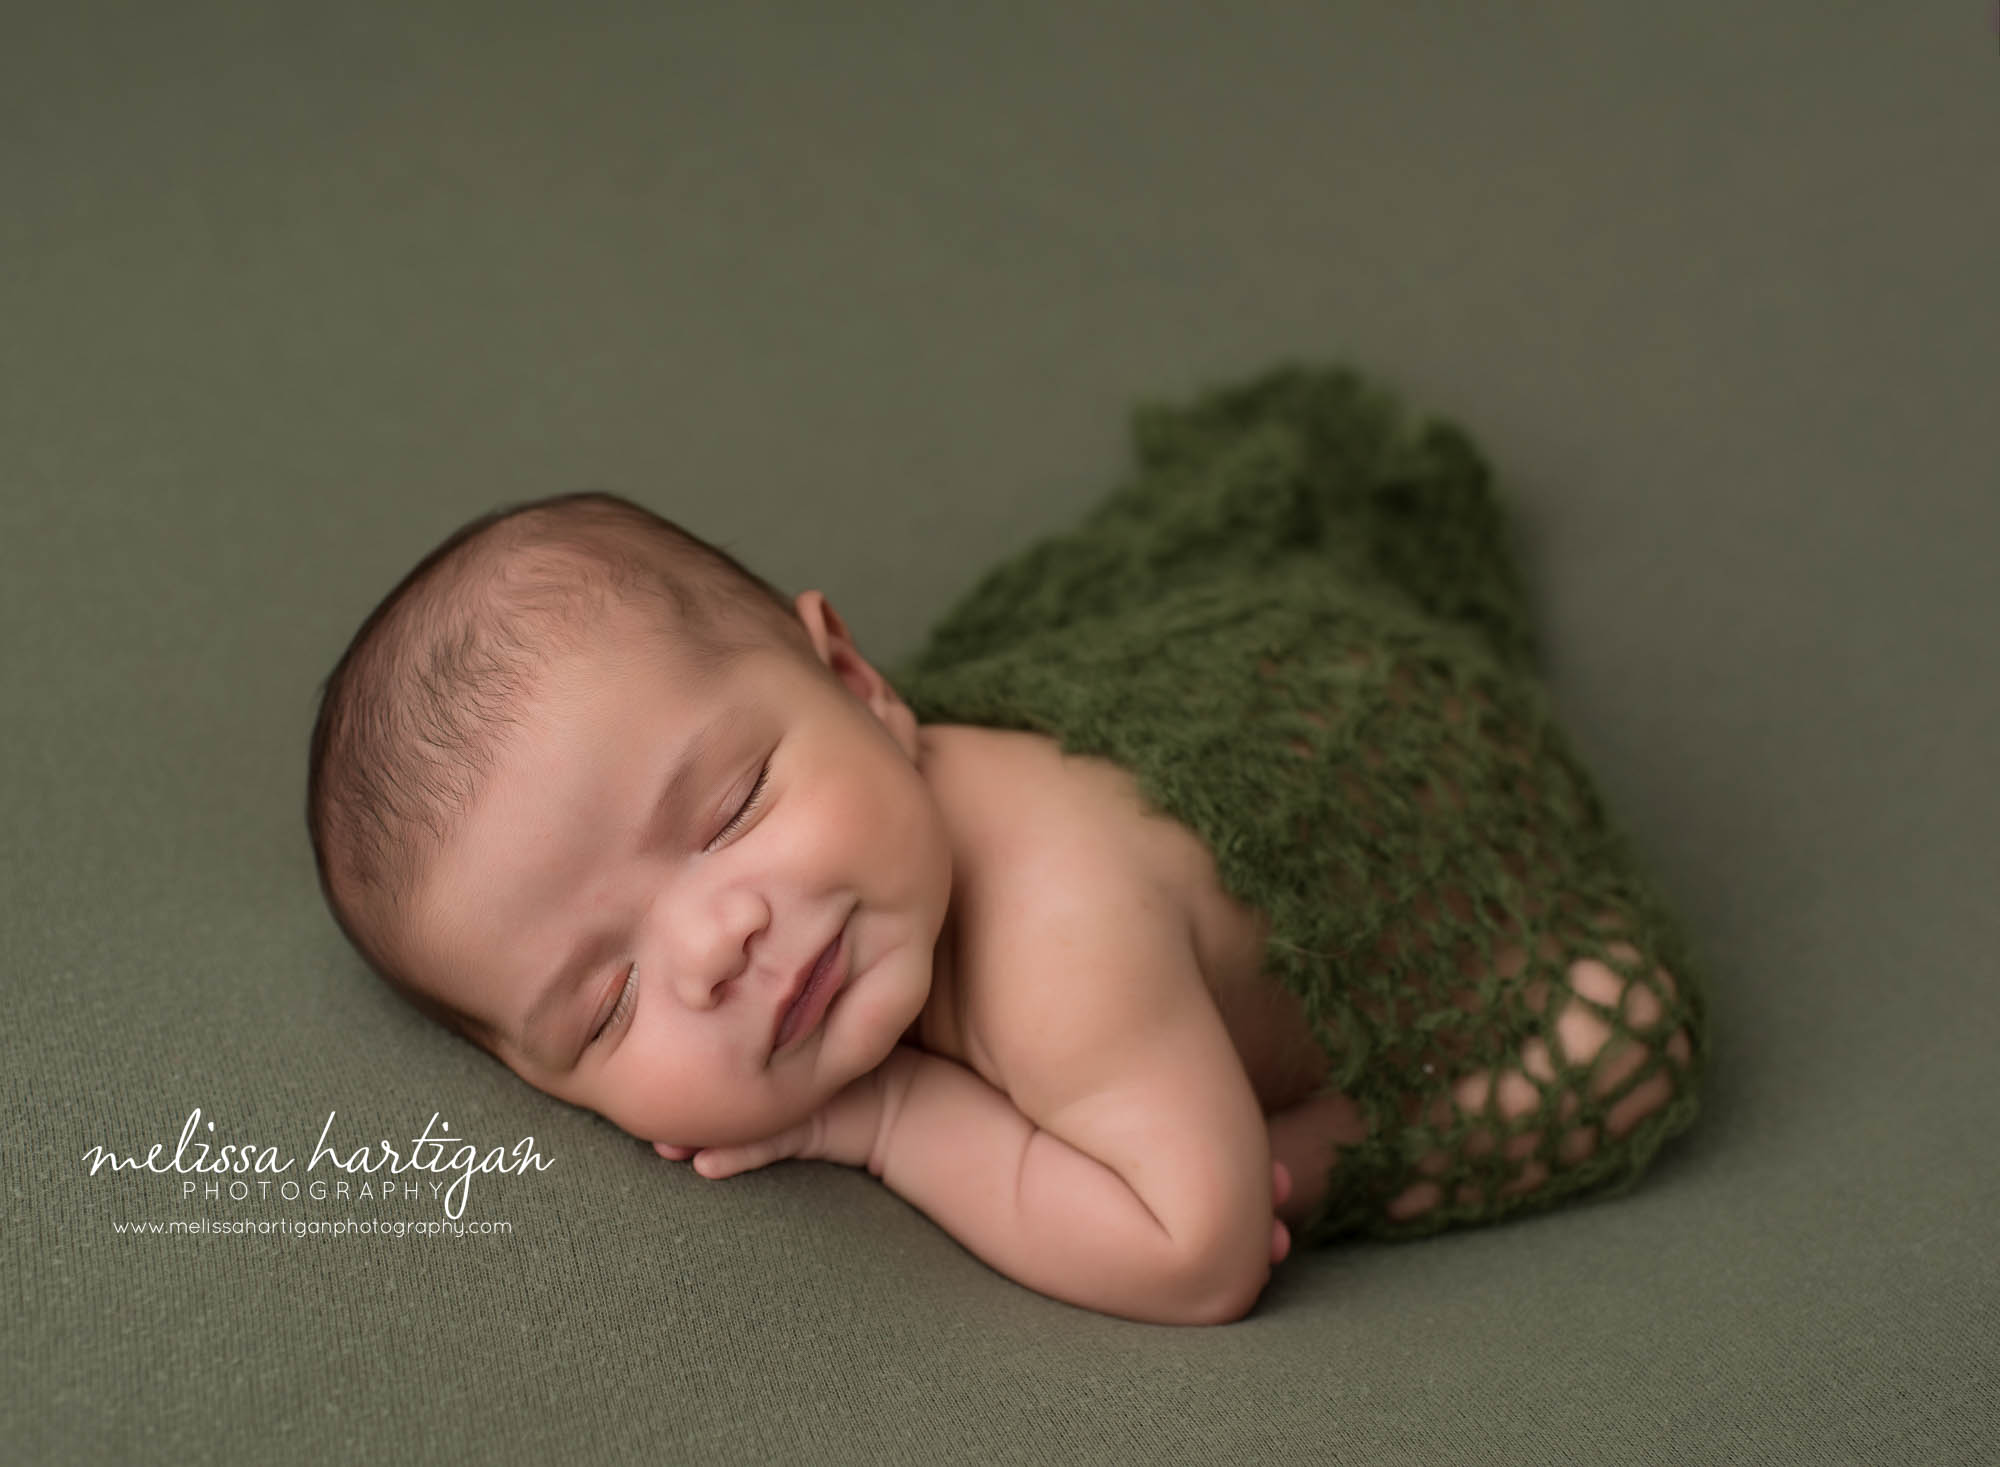 newborn baby boy posed on tummy with green knitted layer draped over